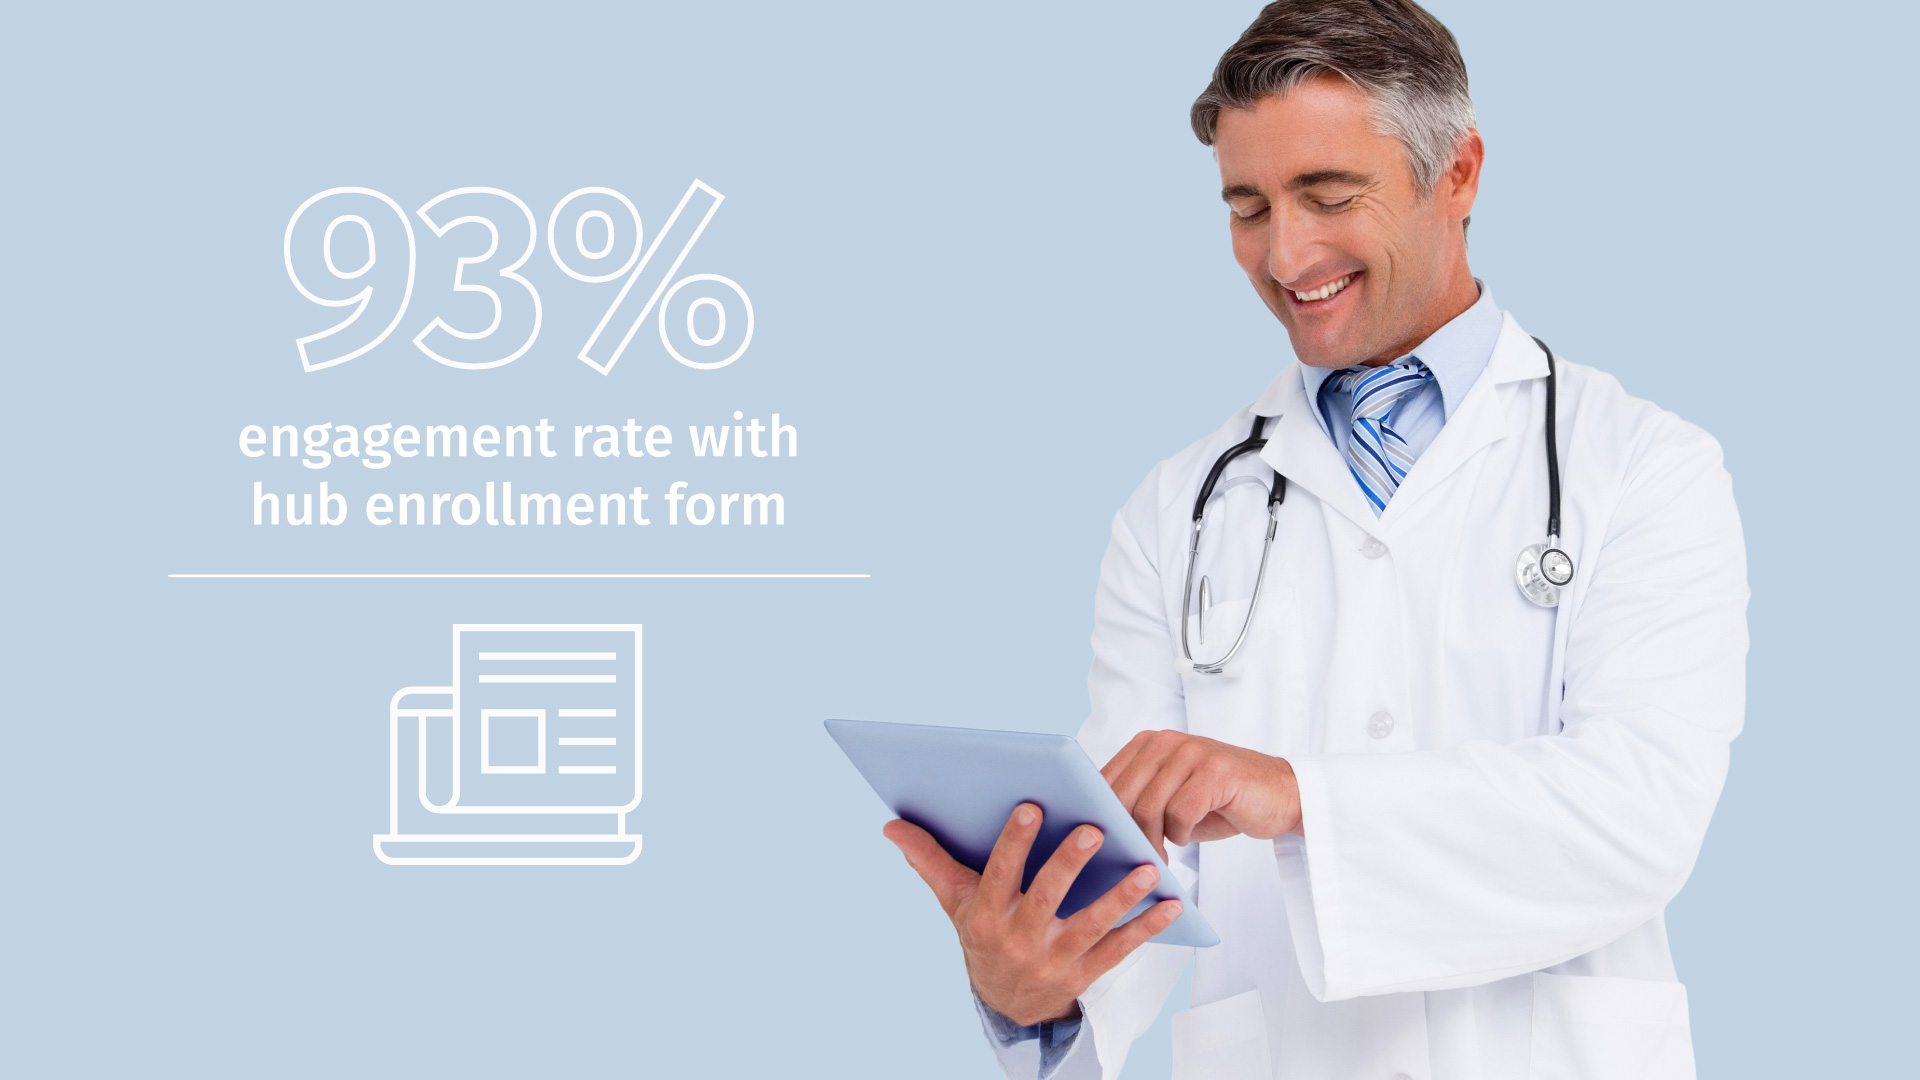 male doctor smiling holding a tablet text on image that says 93% engagement rate with hub enrollment form